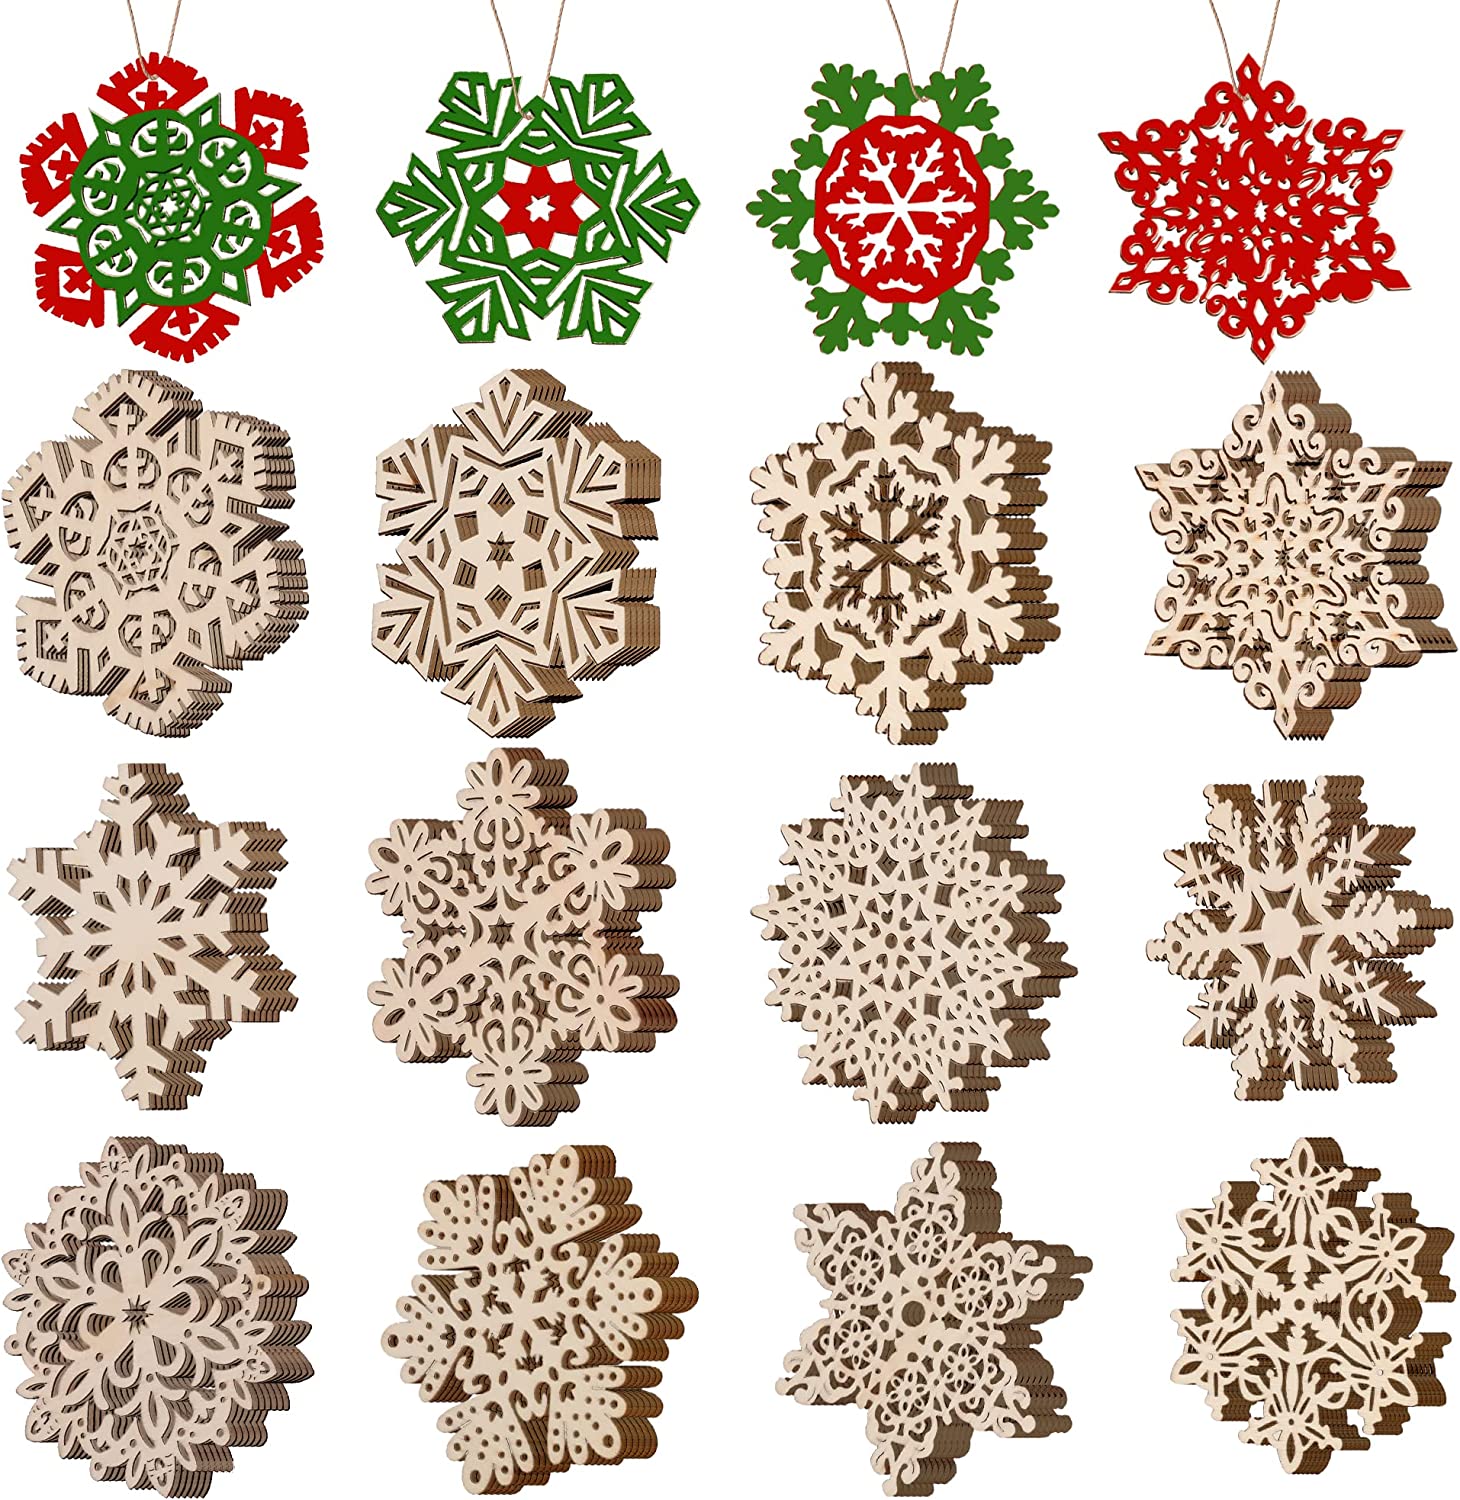 Joiedomi 36 Pcs Wooden Christmas Ornaments Hanging Snowflakes Ornaments for Holidays, Party Decoration, Tree Ornaments, Brown